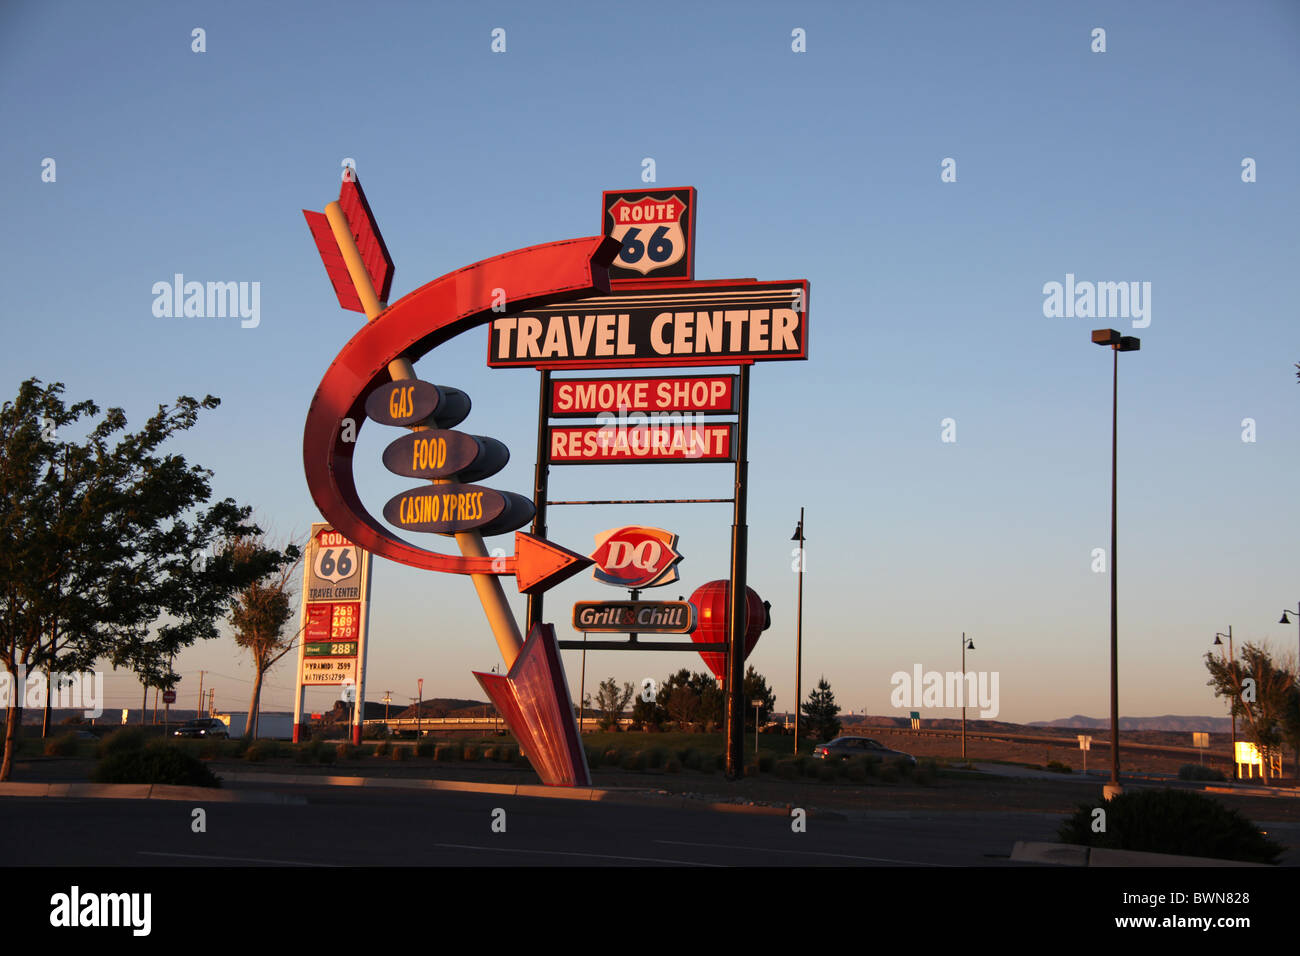 Route 66 Travel Center roadside neon sign on Interstate 40 in Albuquerque, New Mexico, United States, June 16, 2010 Stock Photo